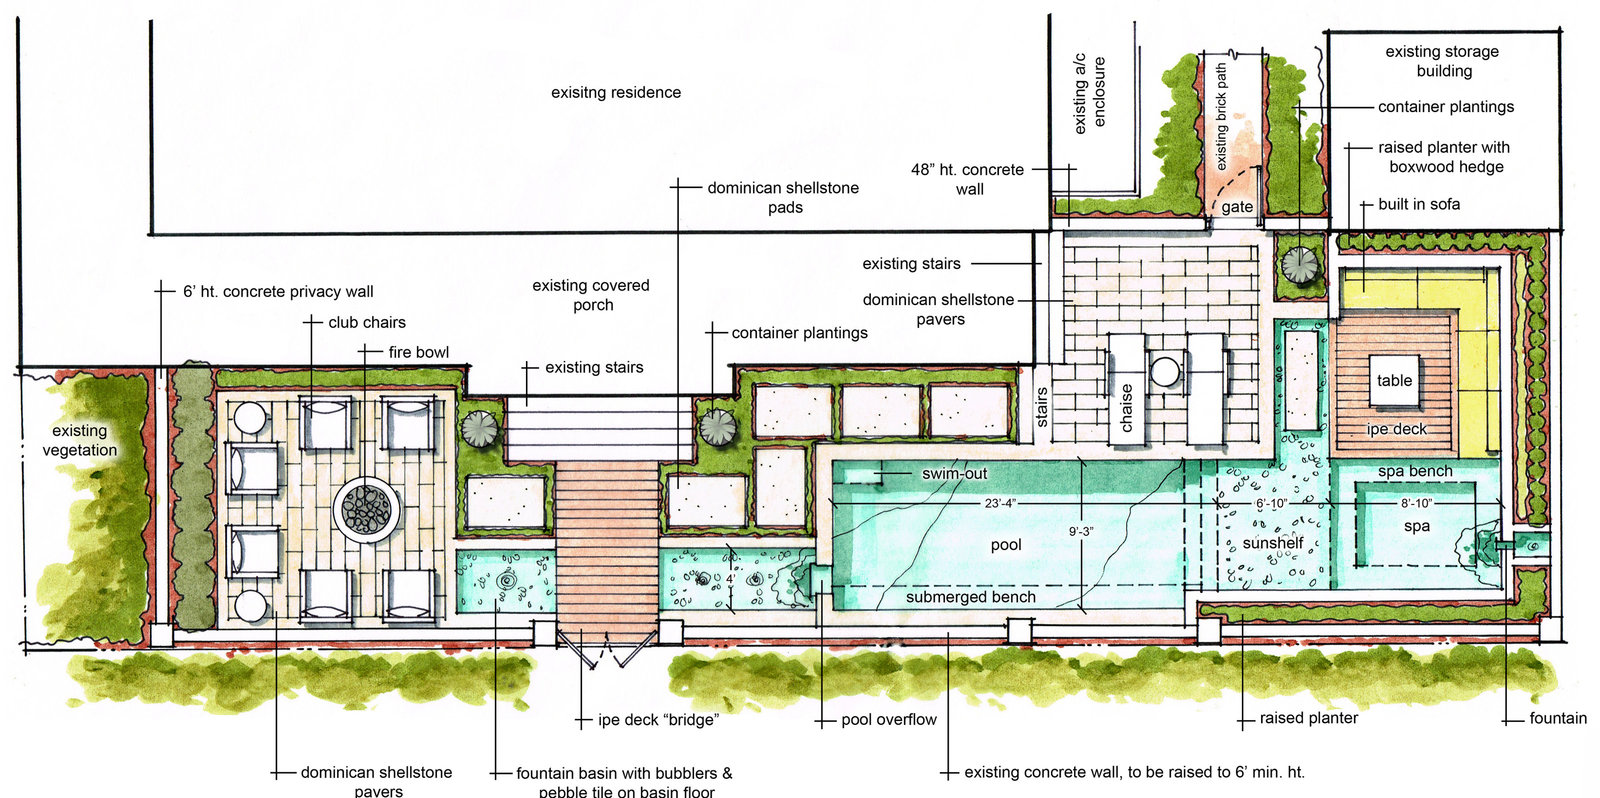 Parks Residence - Schematic Design